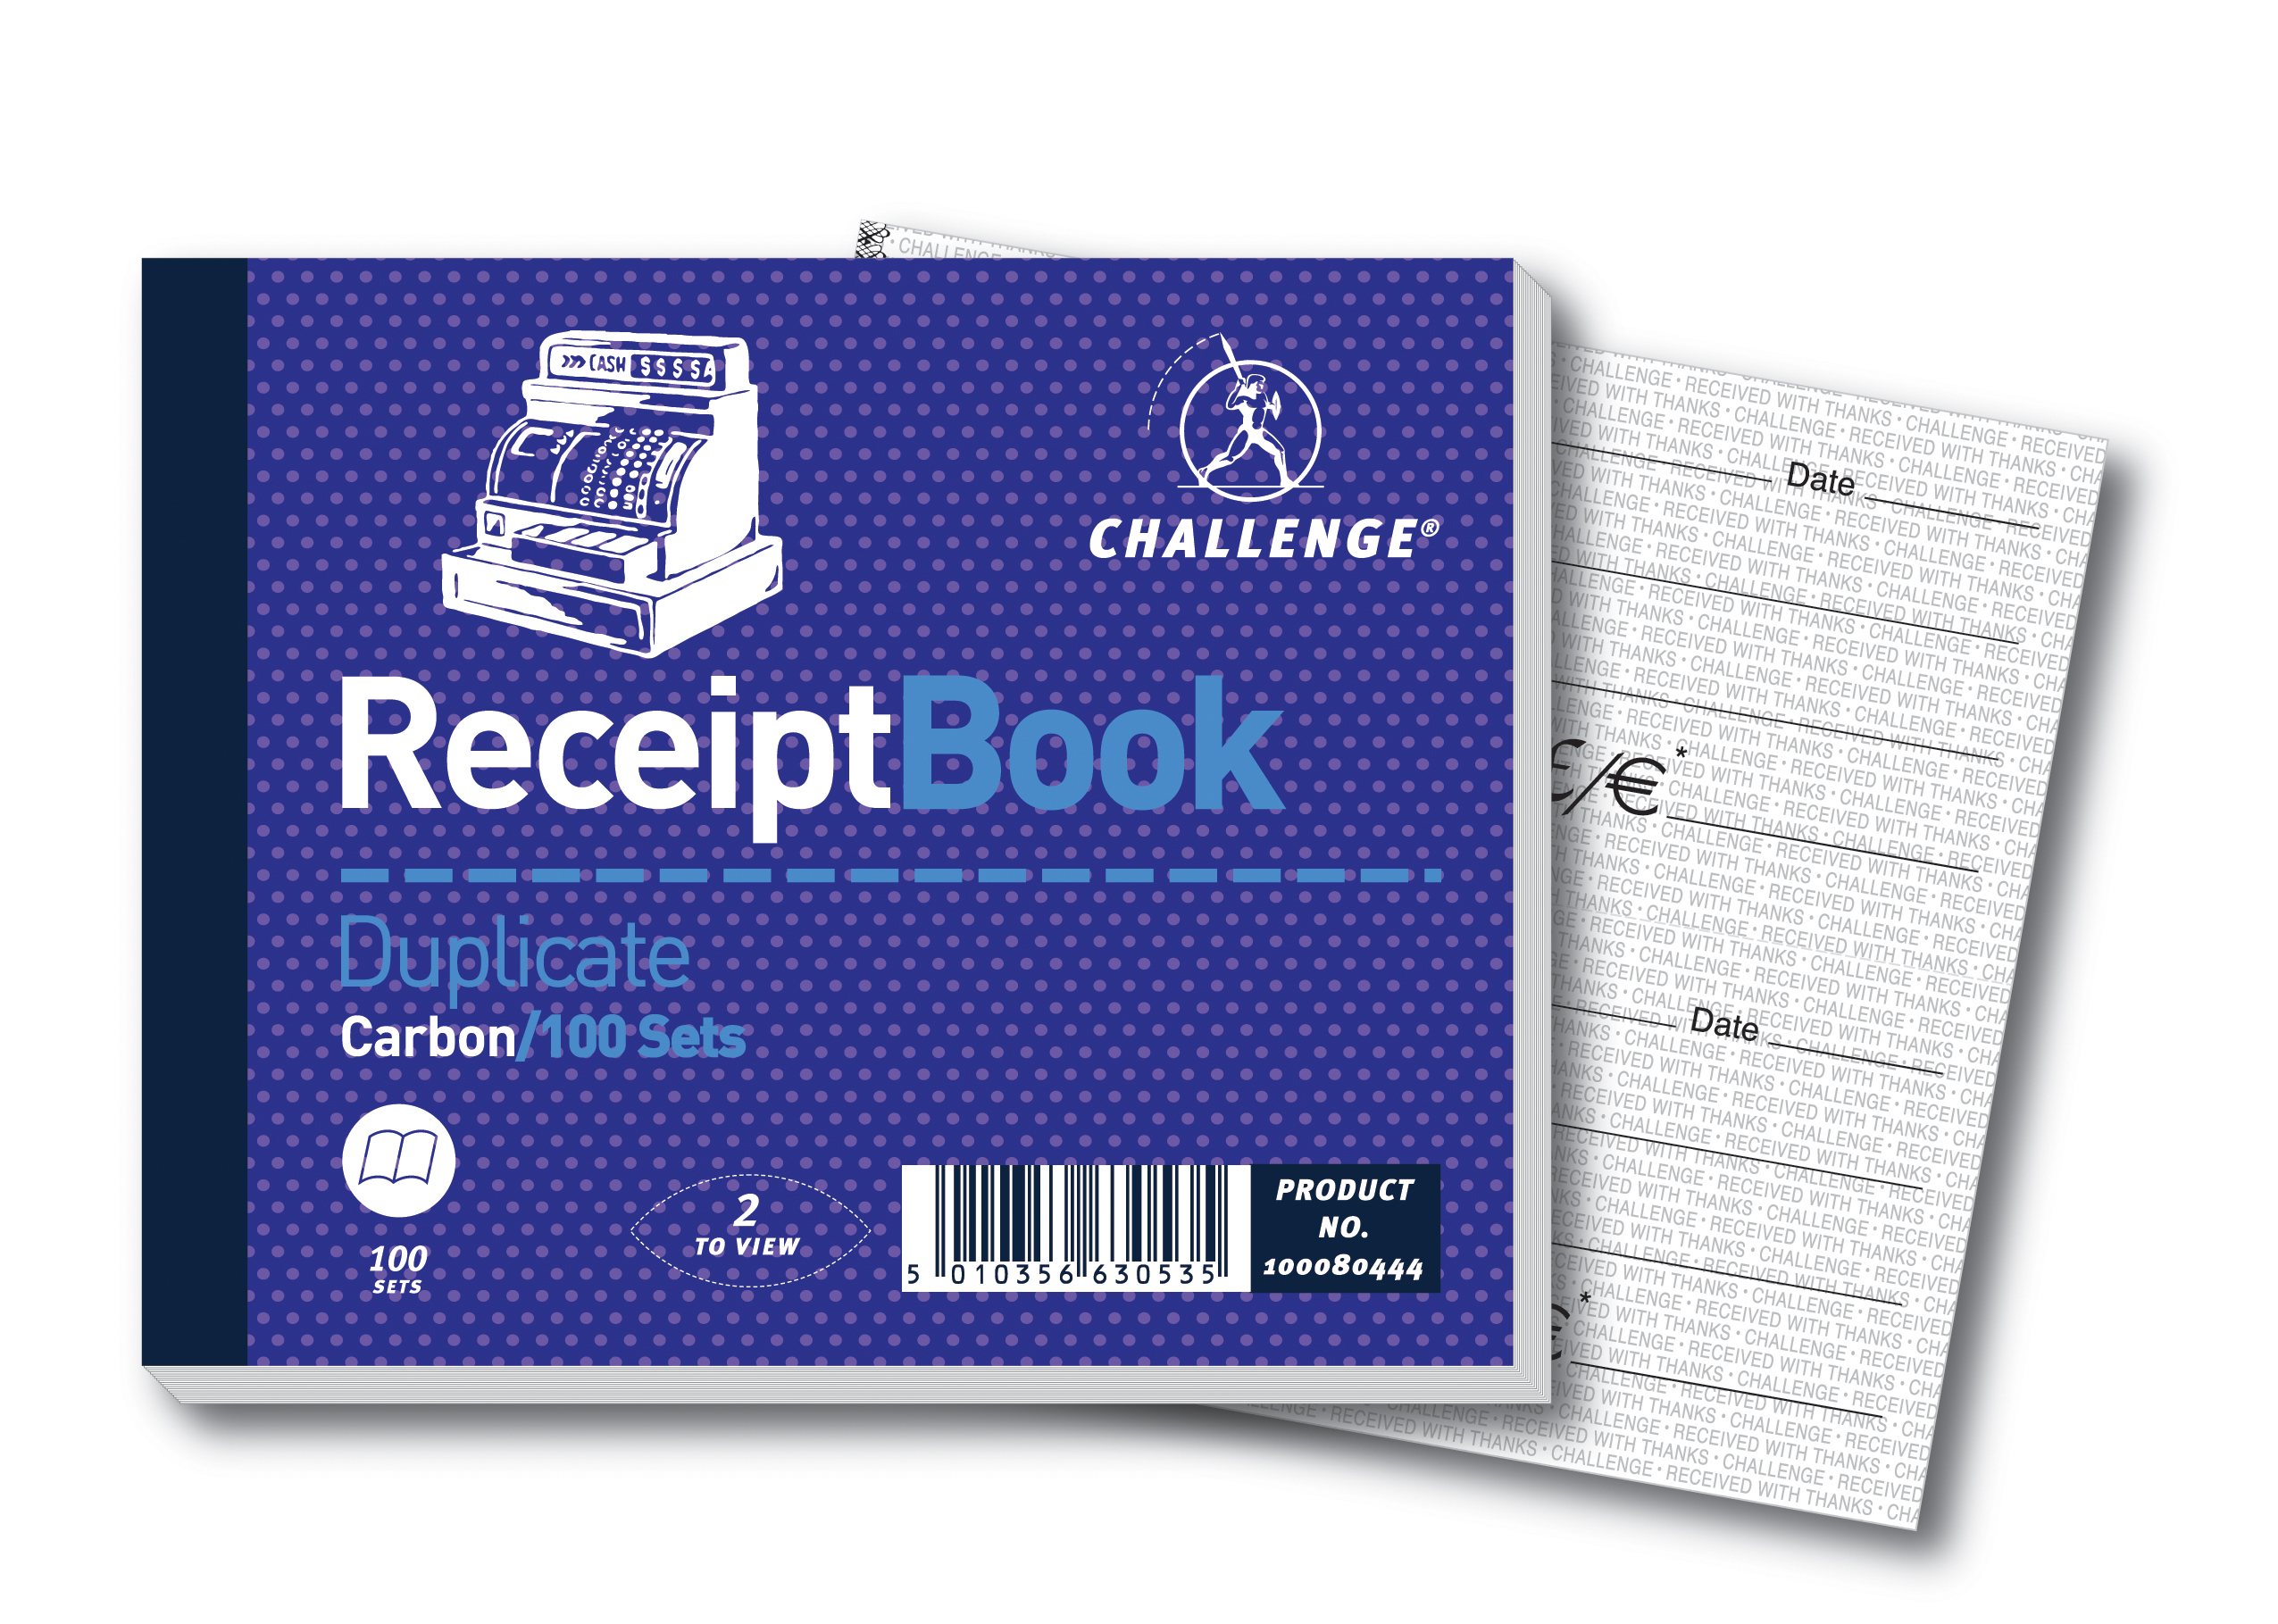 Challenge 105x130mm Duplicate Receipt Book Carbon Taped Cloth Binding 100 Sets (Pack 5)